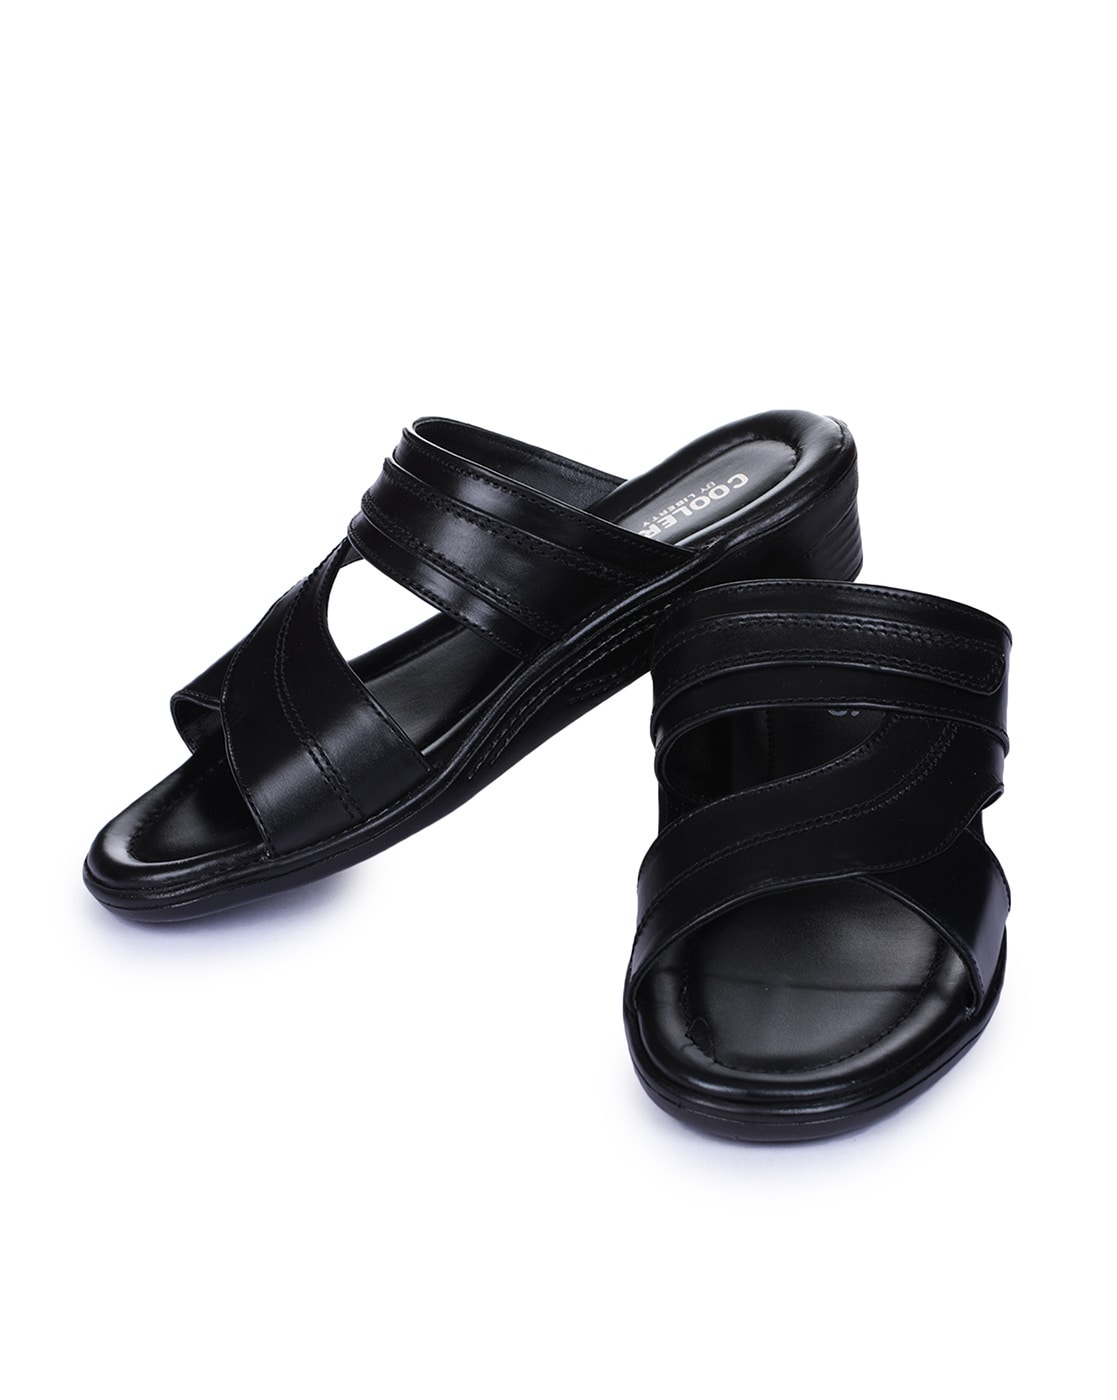 Coolers (from Liberty) Men's Black Leather Sandals and Floaters - 9 UK  (2013-24) : Amazon.in: Fashion